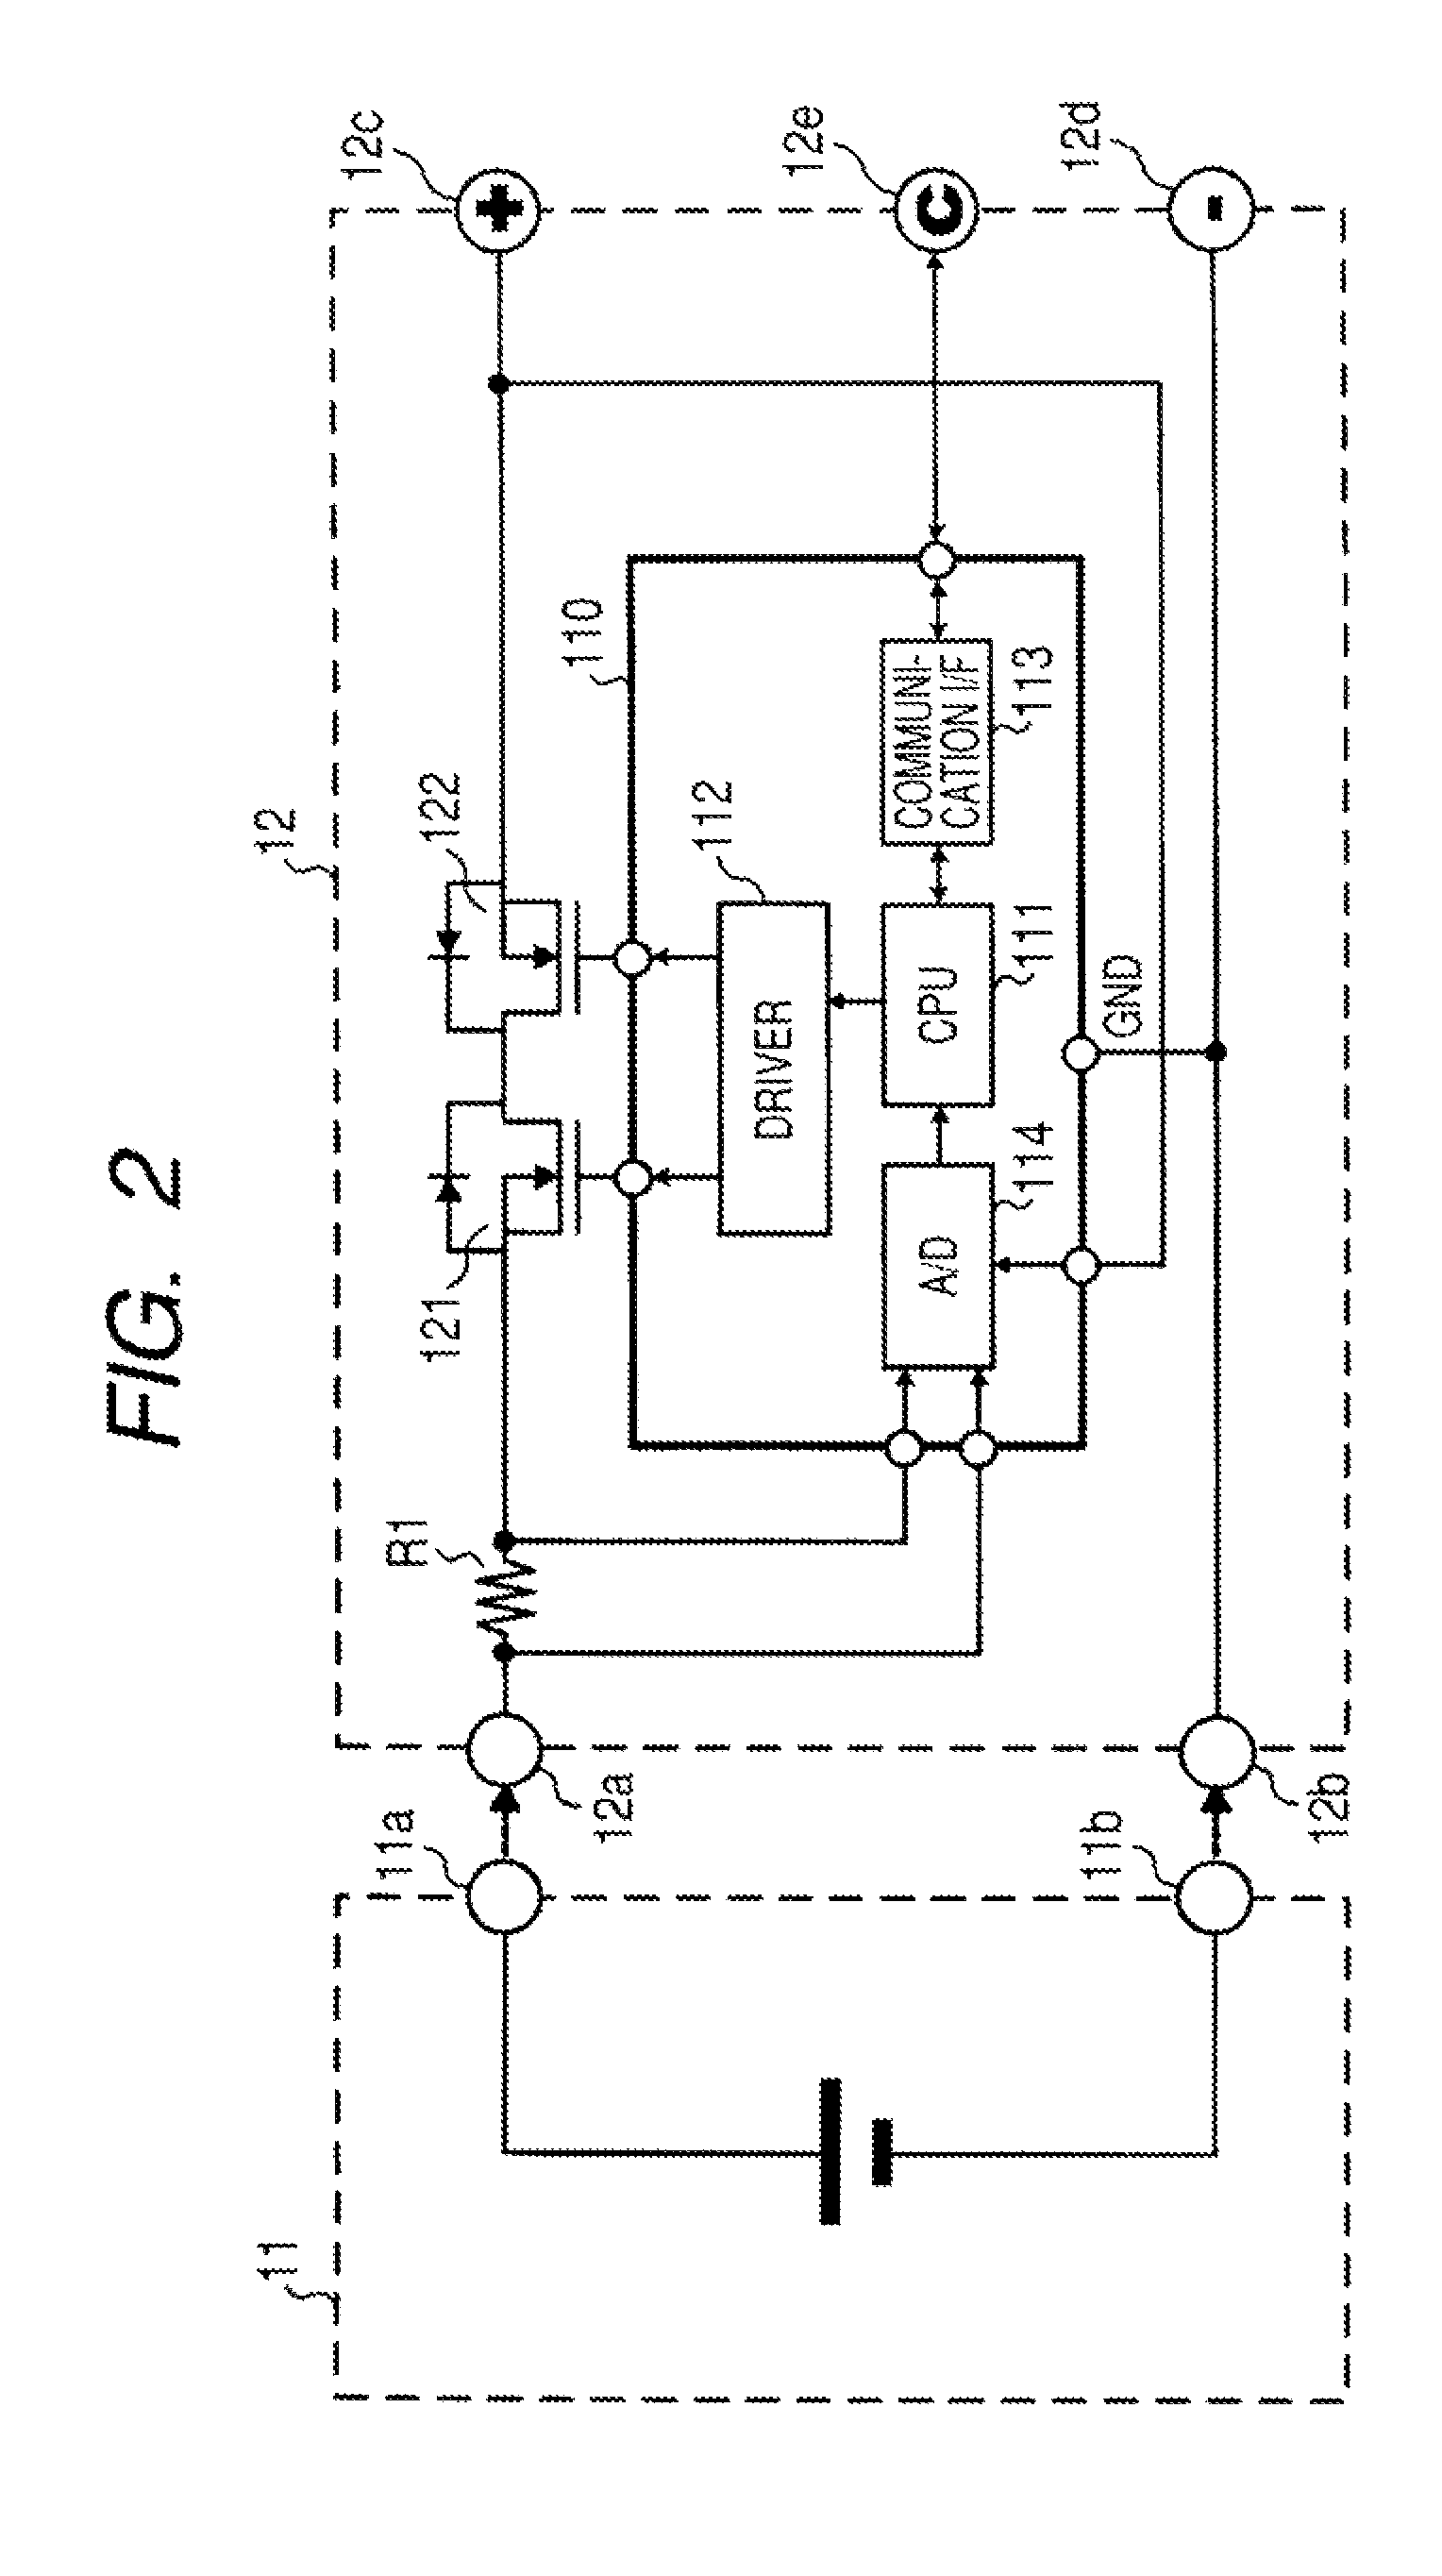 Battery pack, electronic appliance, and method of detecting remaining amount of battery